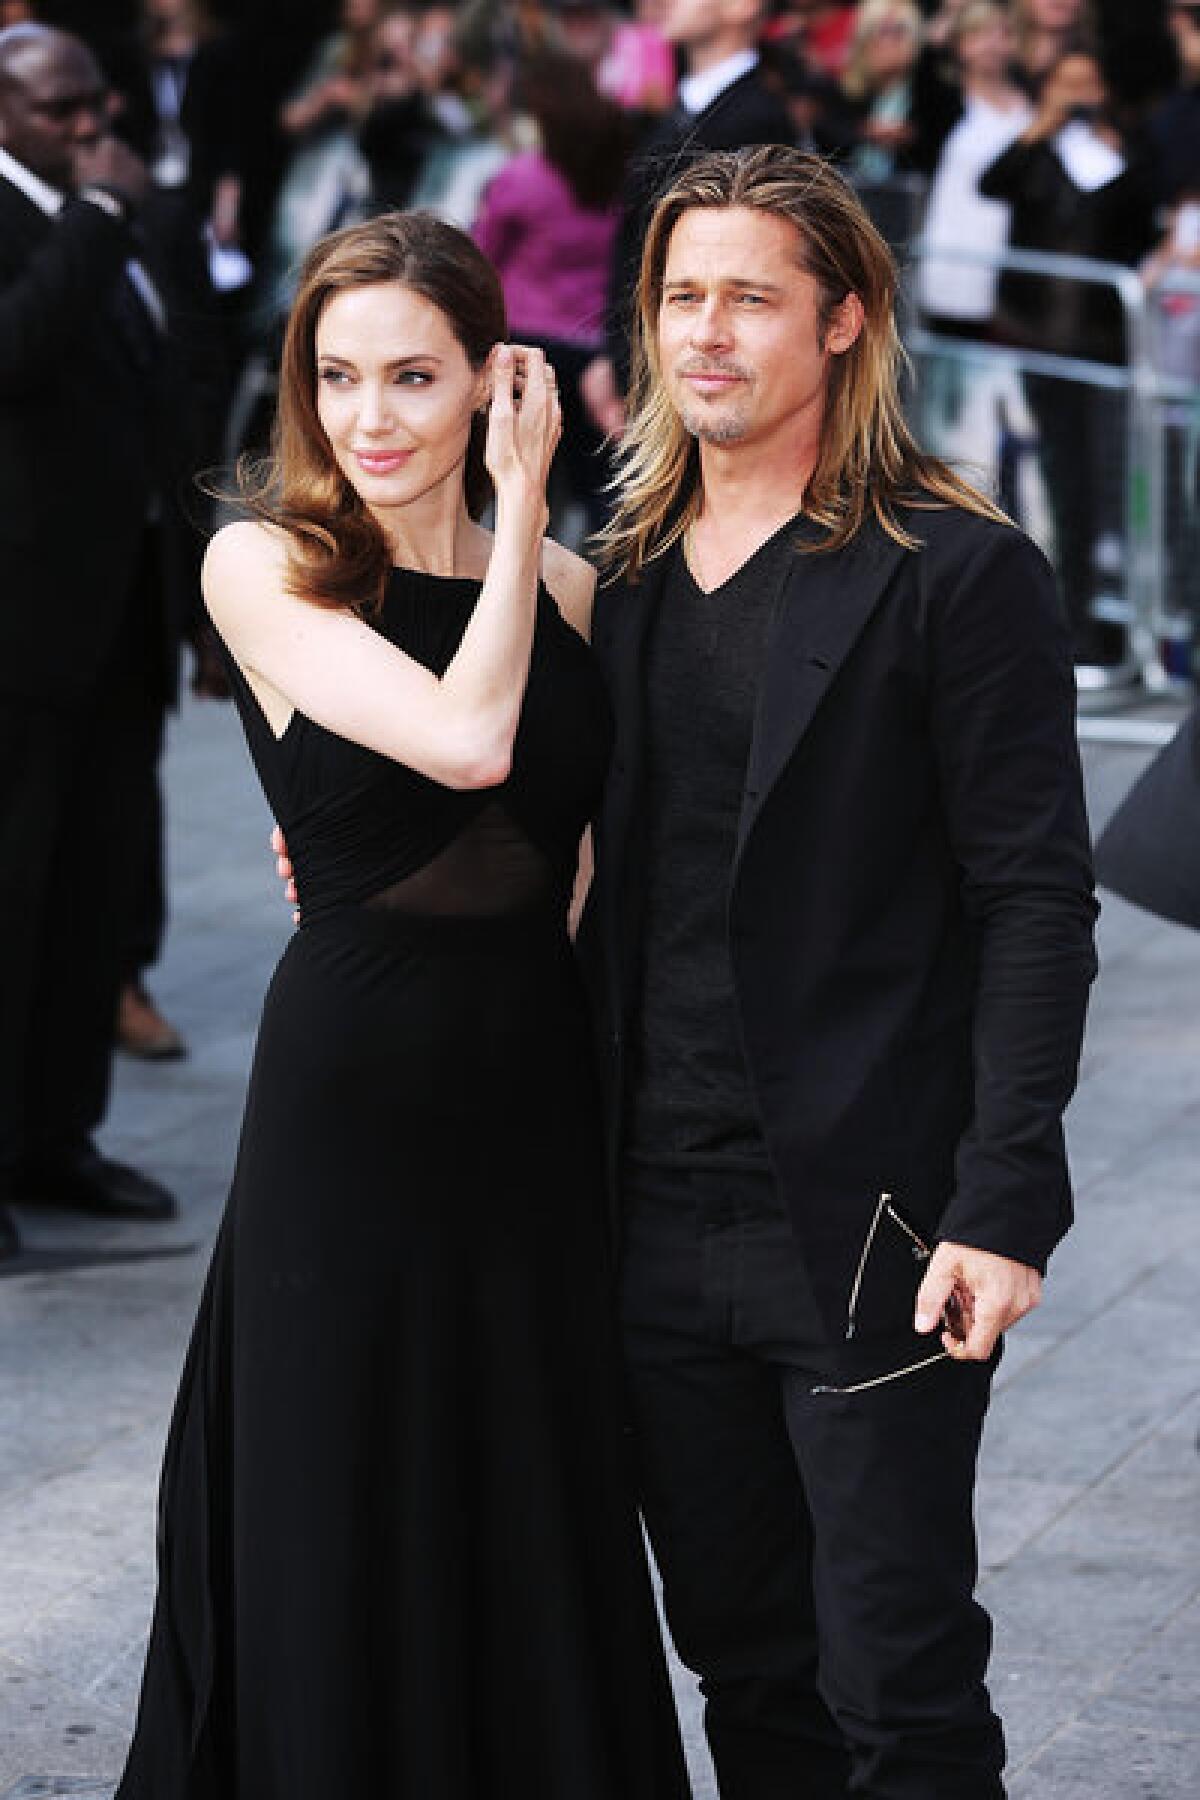 In her first red-carpet appearance since revealing her double mastectomy, Angelina Jolie accompanies "World War Z" star Brad Pitt at the movie's London premiere Sunday.